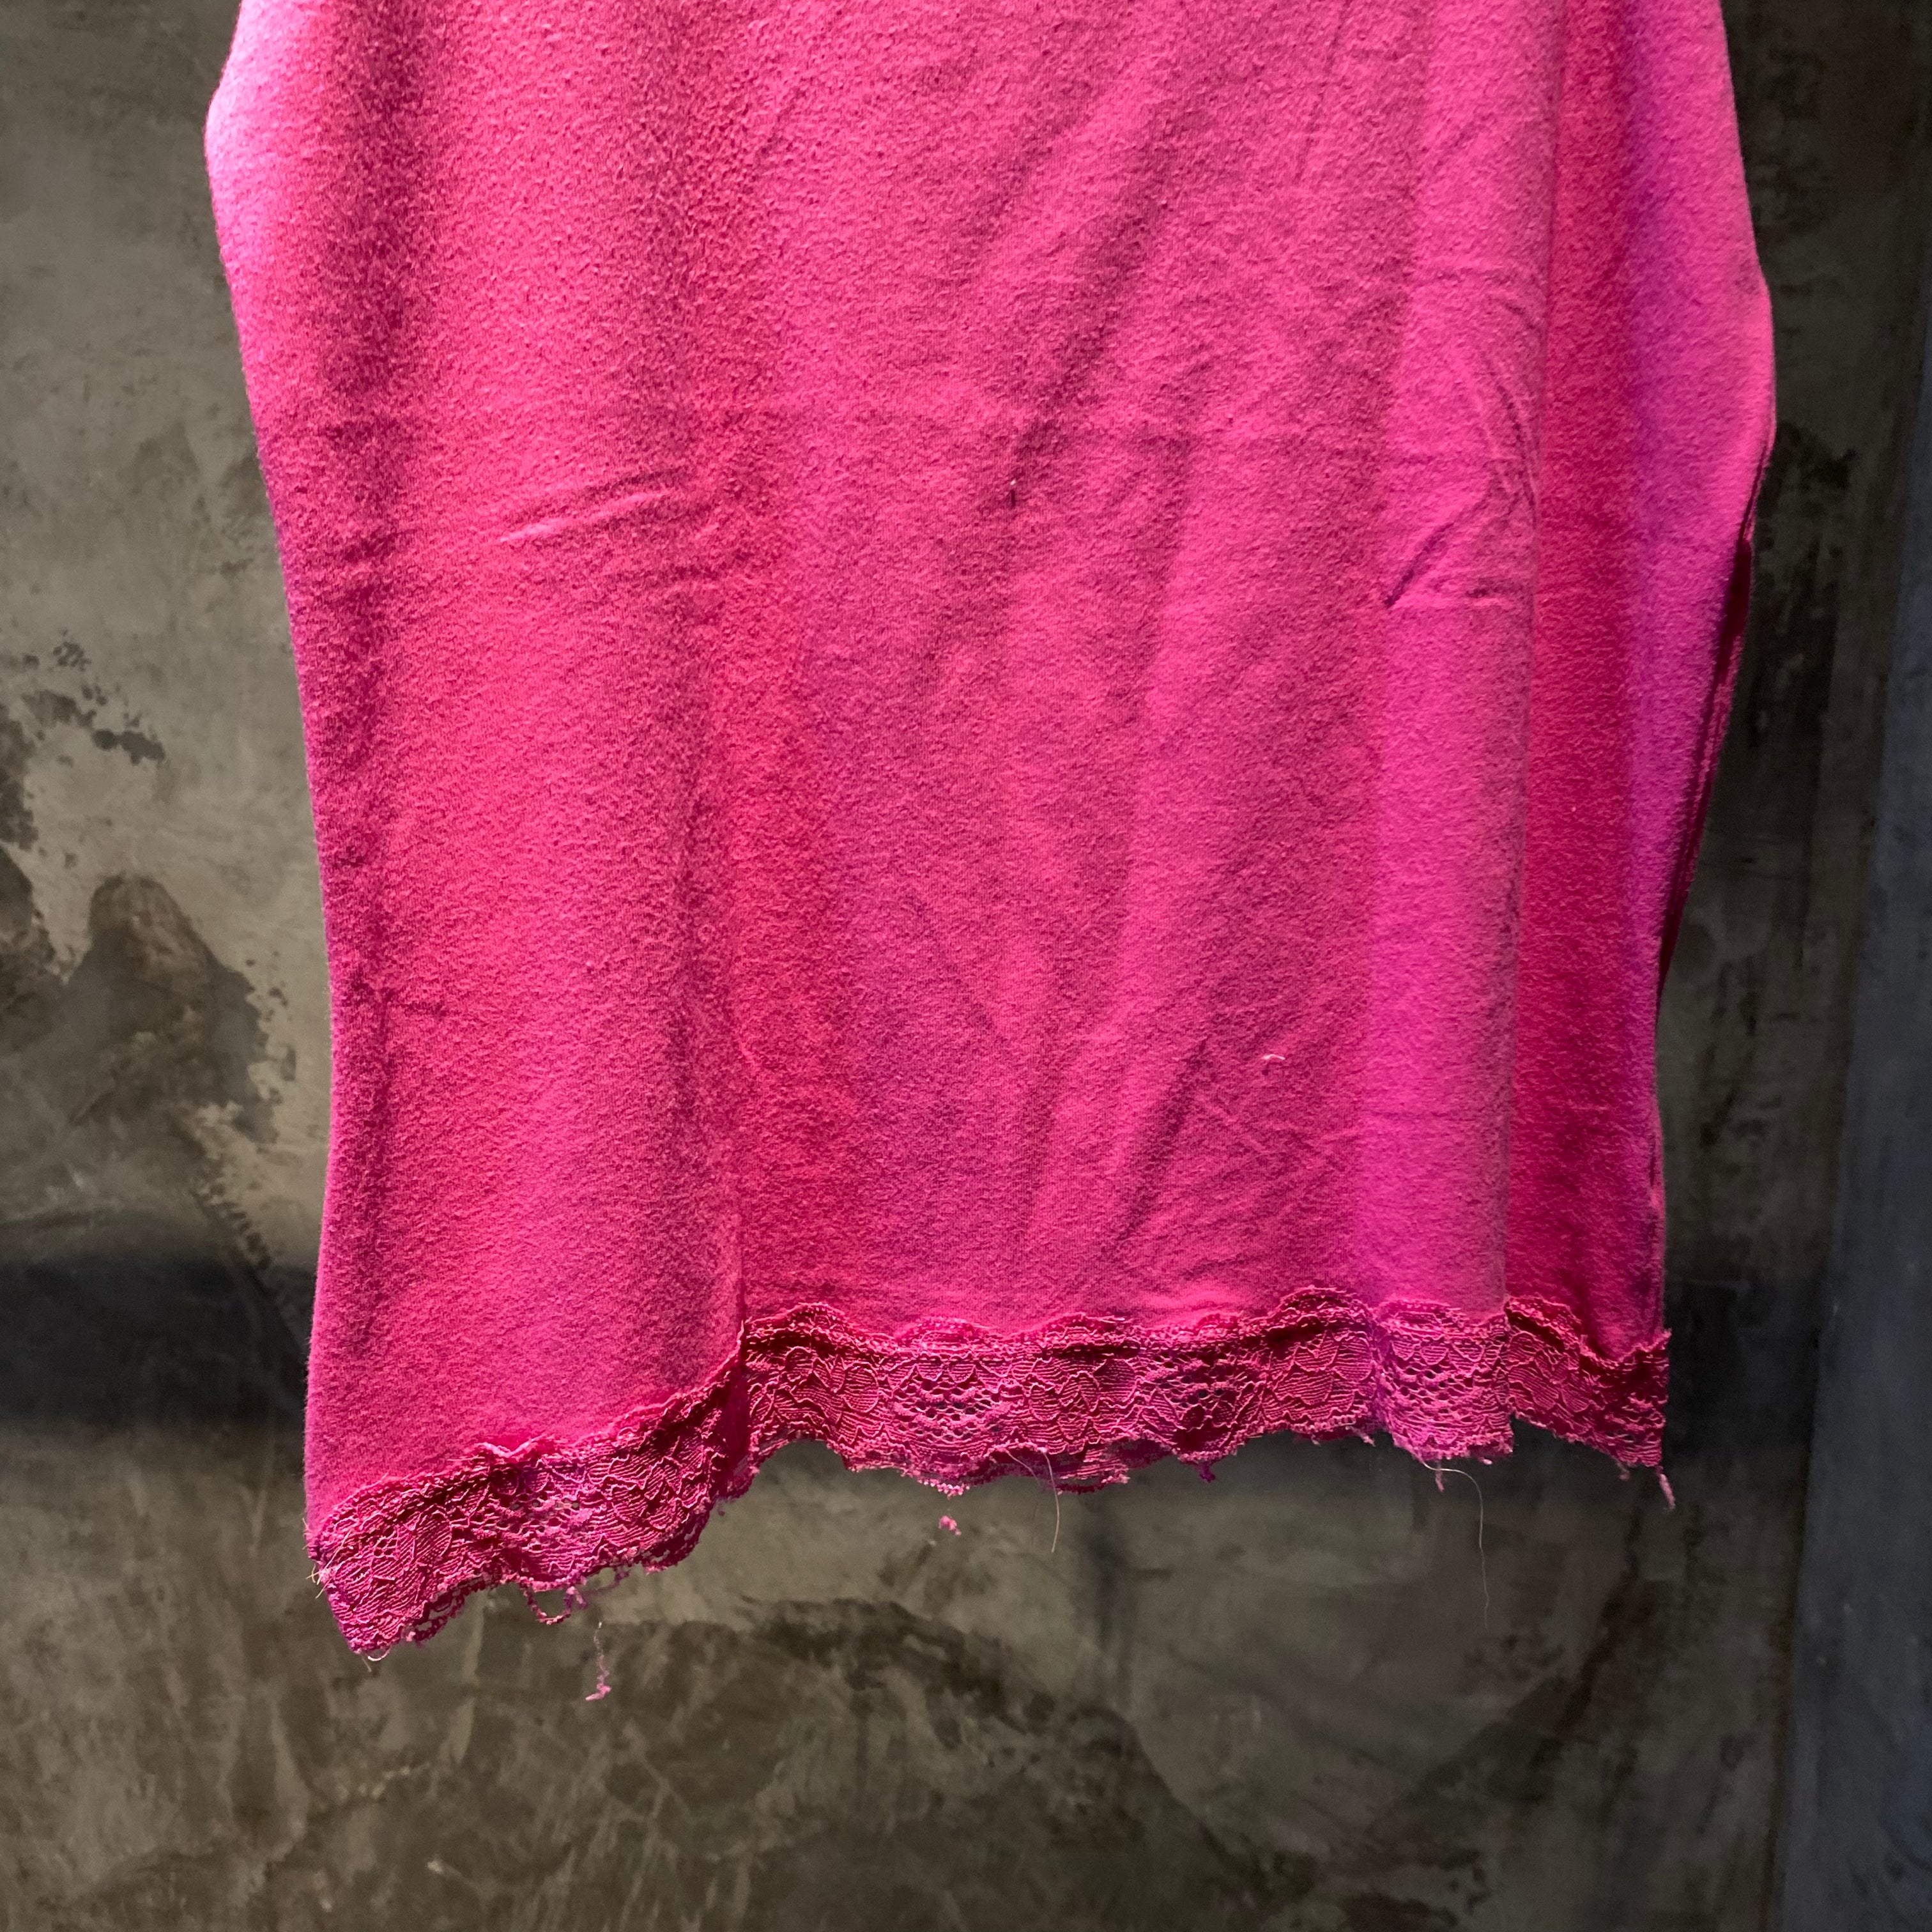 Pink Lace Top